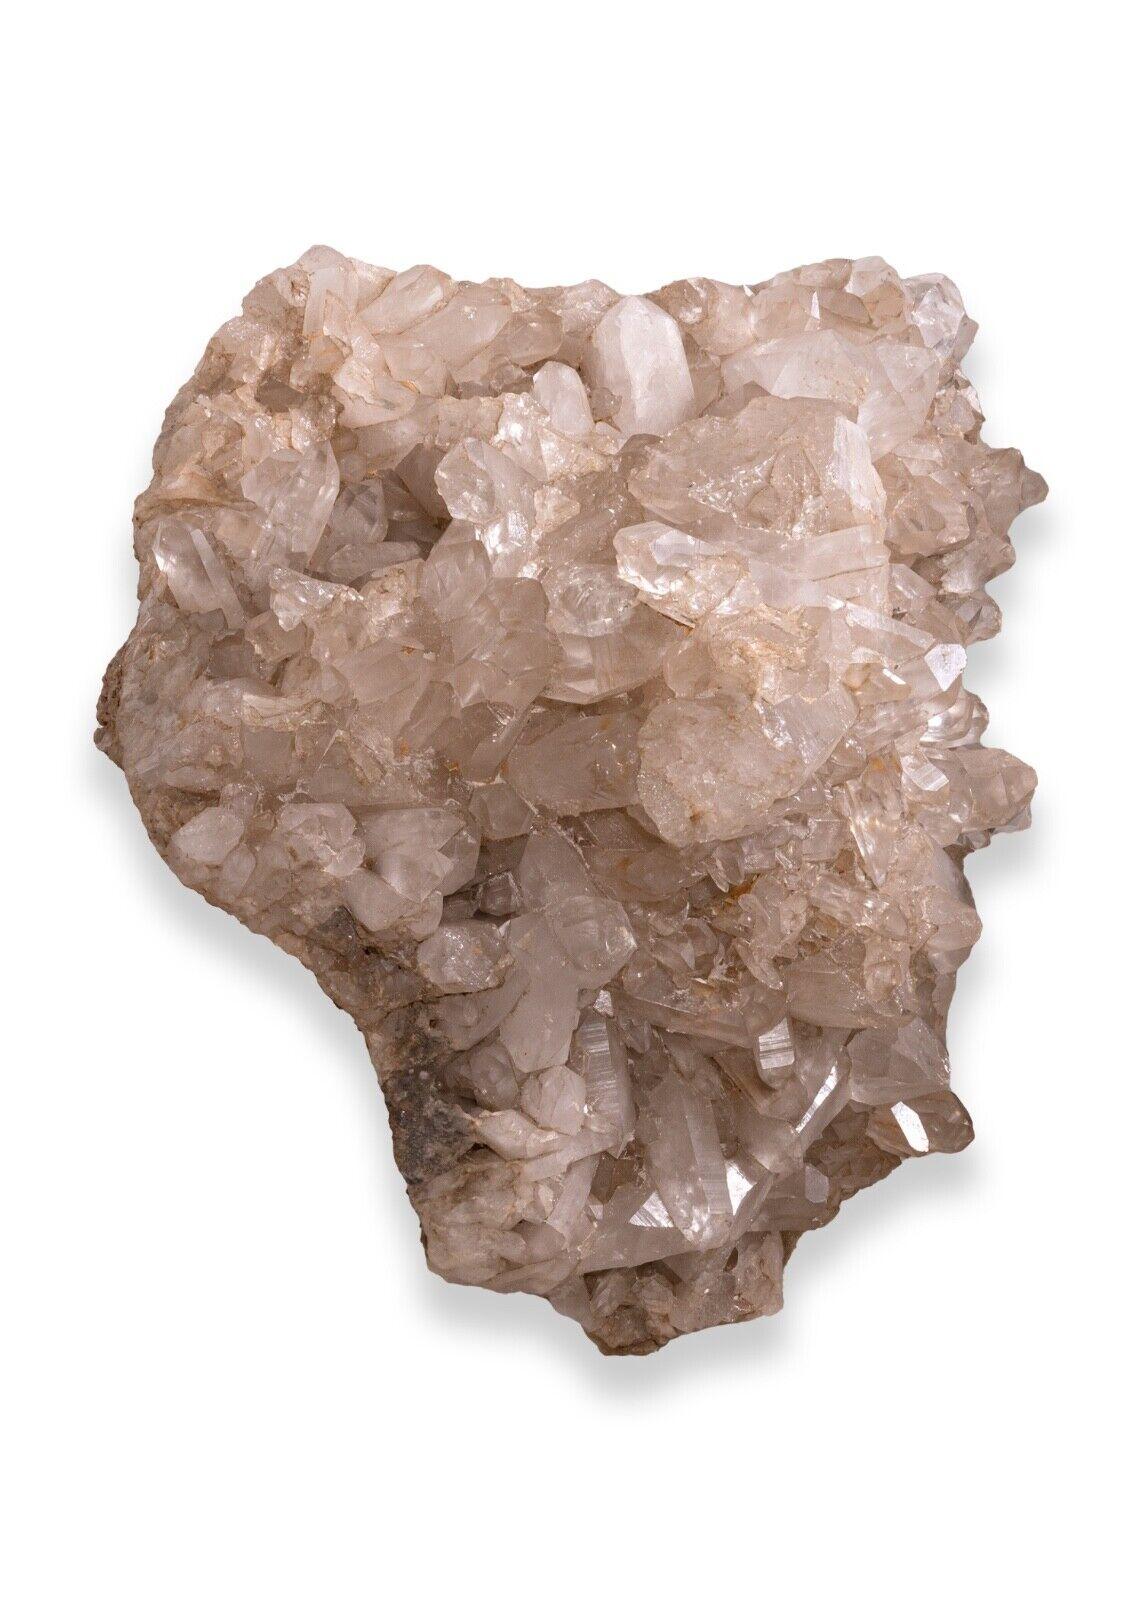 This stunning Monumental Himalayan Quartz Crystal Geode Mineral Specimen is a natural wonder. It is formed when water seeps into cracks in the earth and evaporates, leaving behind a deposit of quartz crystal clusters.This particular geode is from